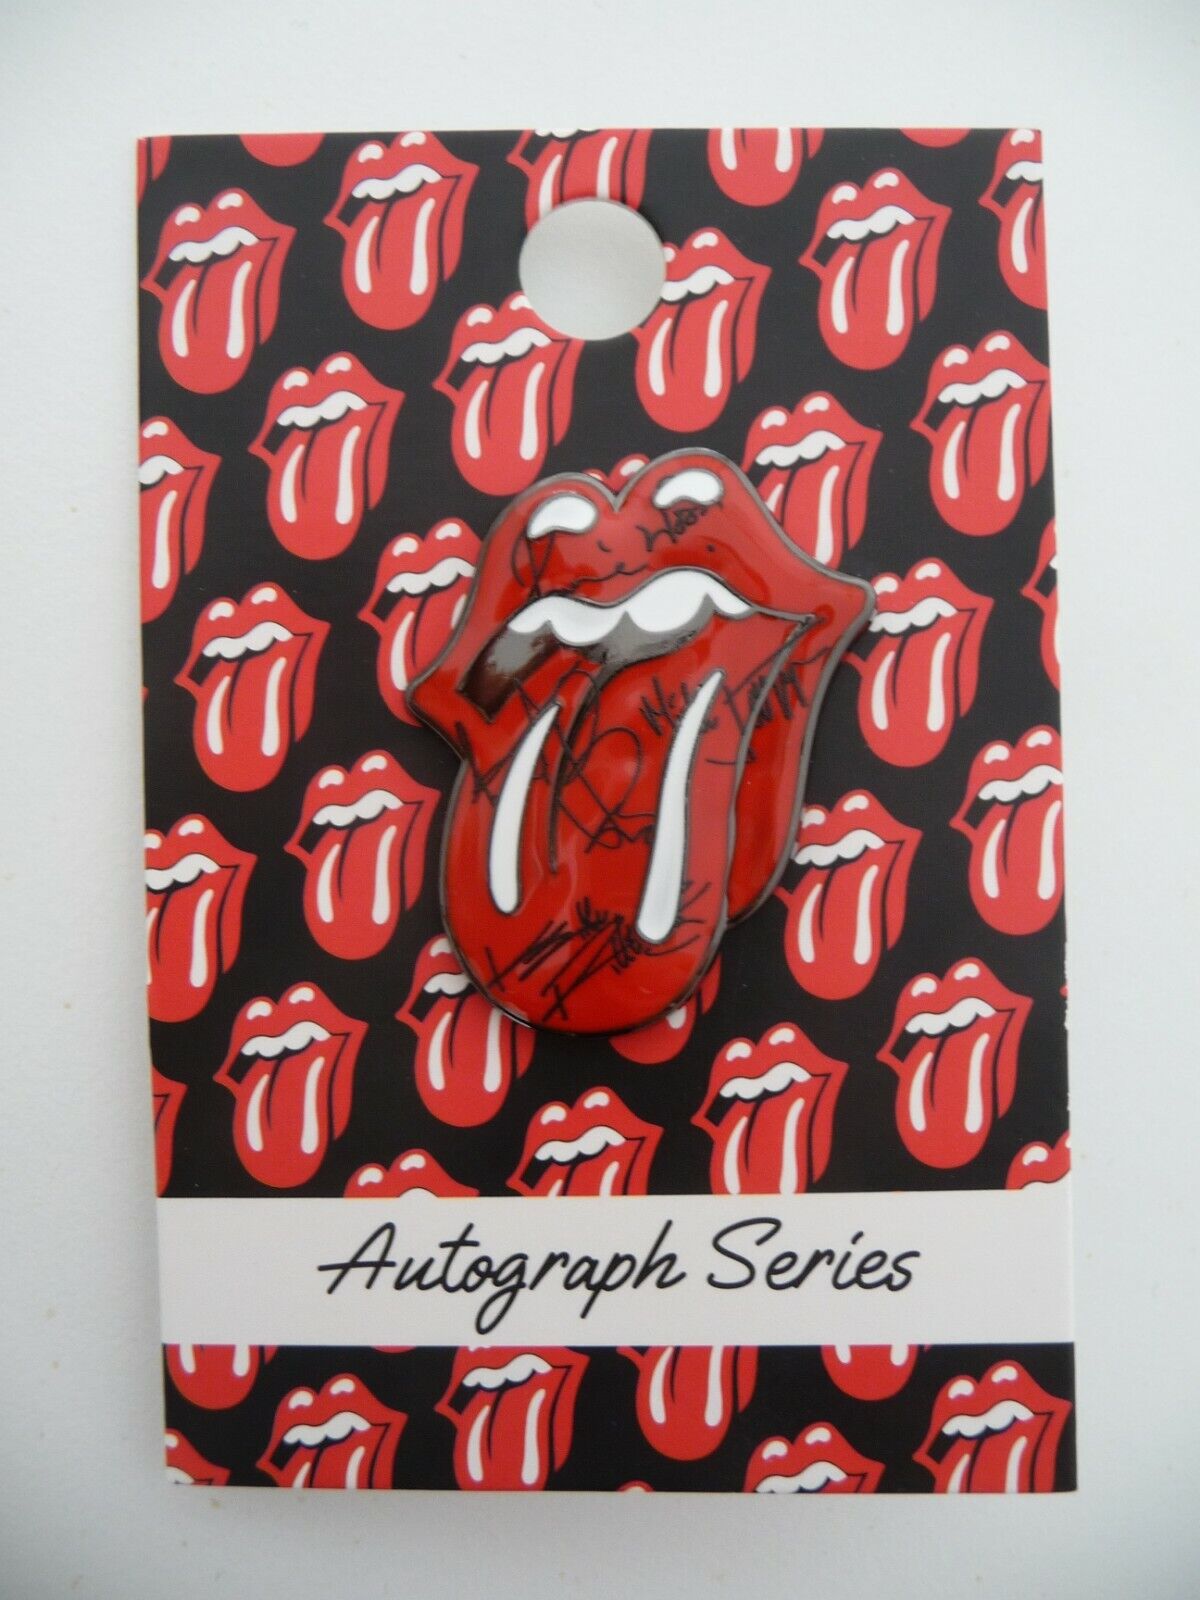 🇬🇧💋 Pin ROLLING STONES X HARD ROCK CAFE "Autograph Pin" 2021